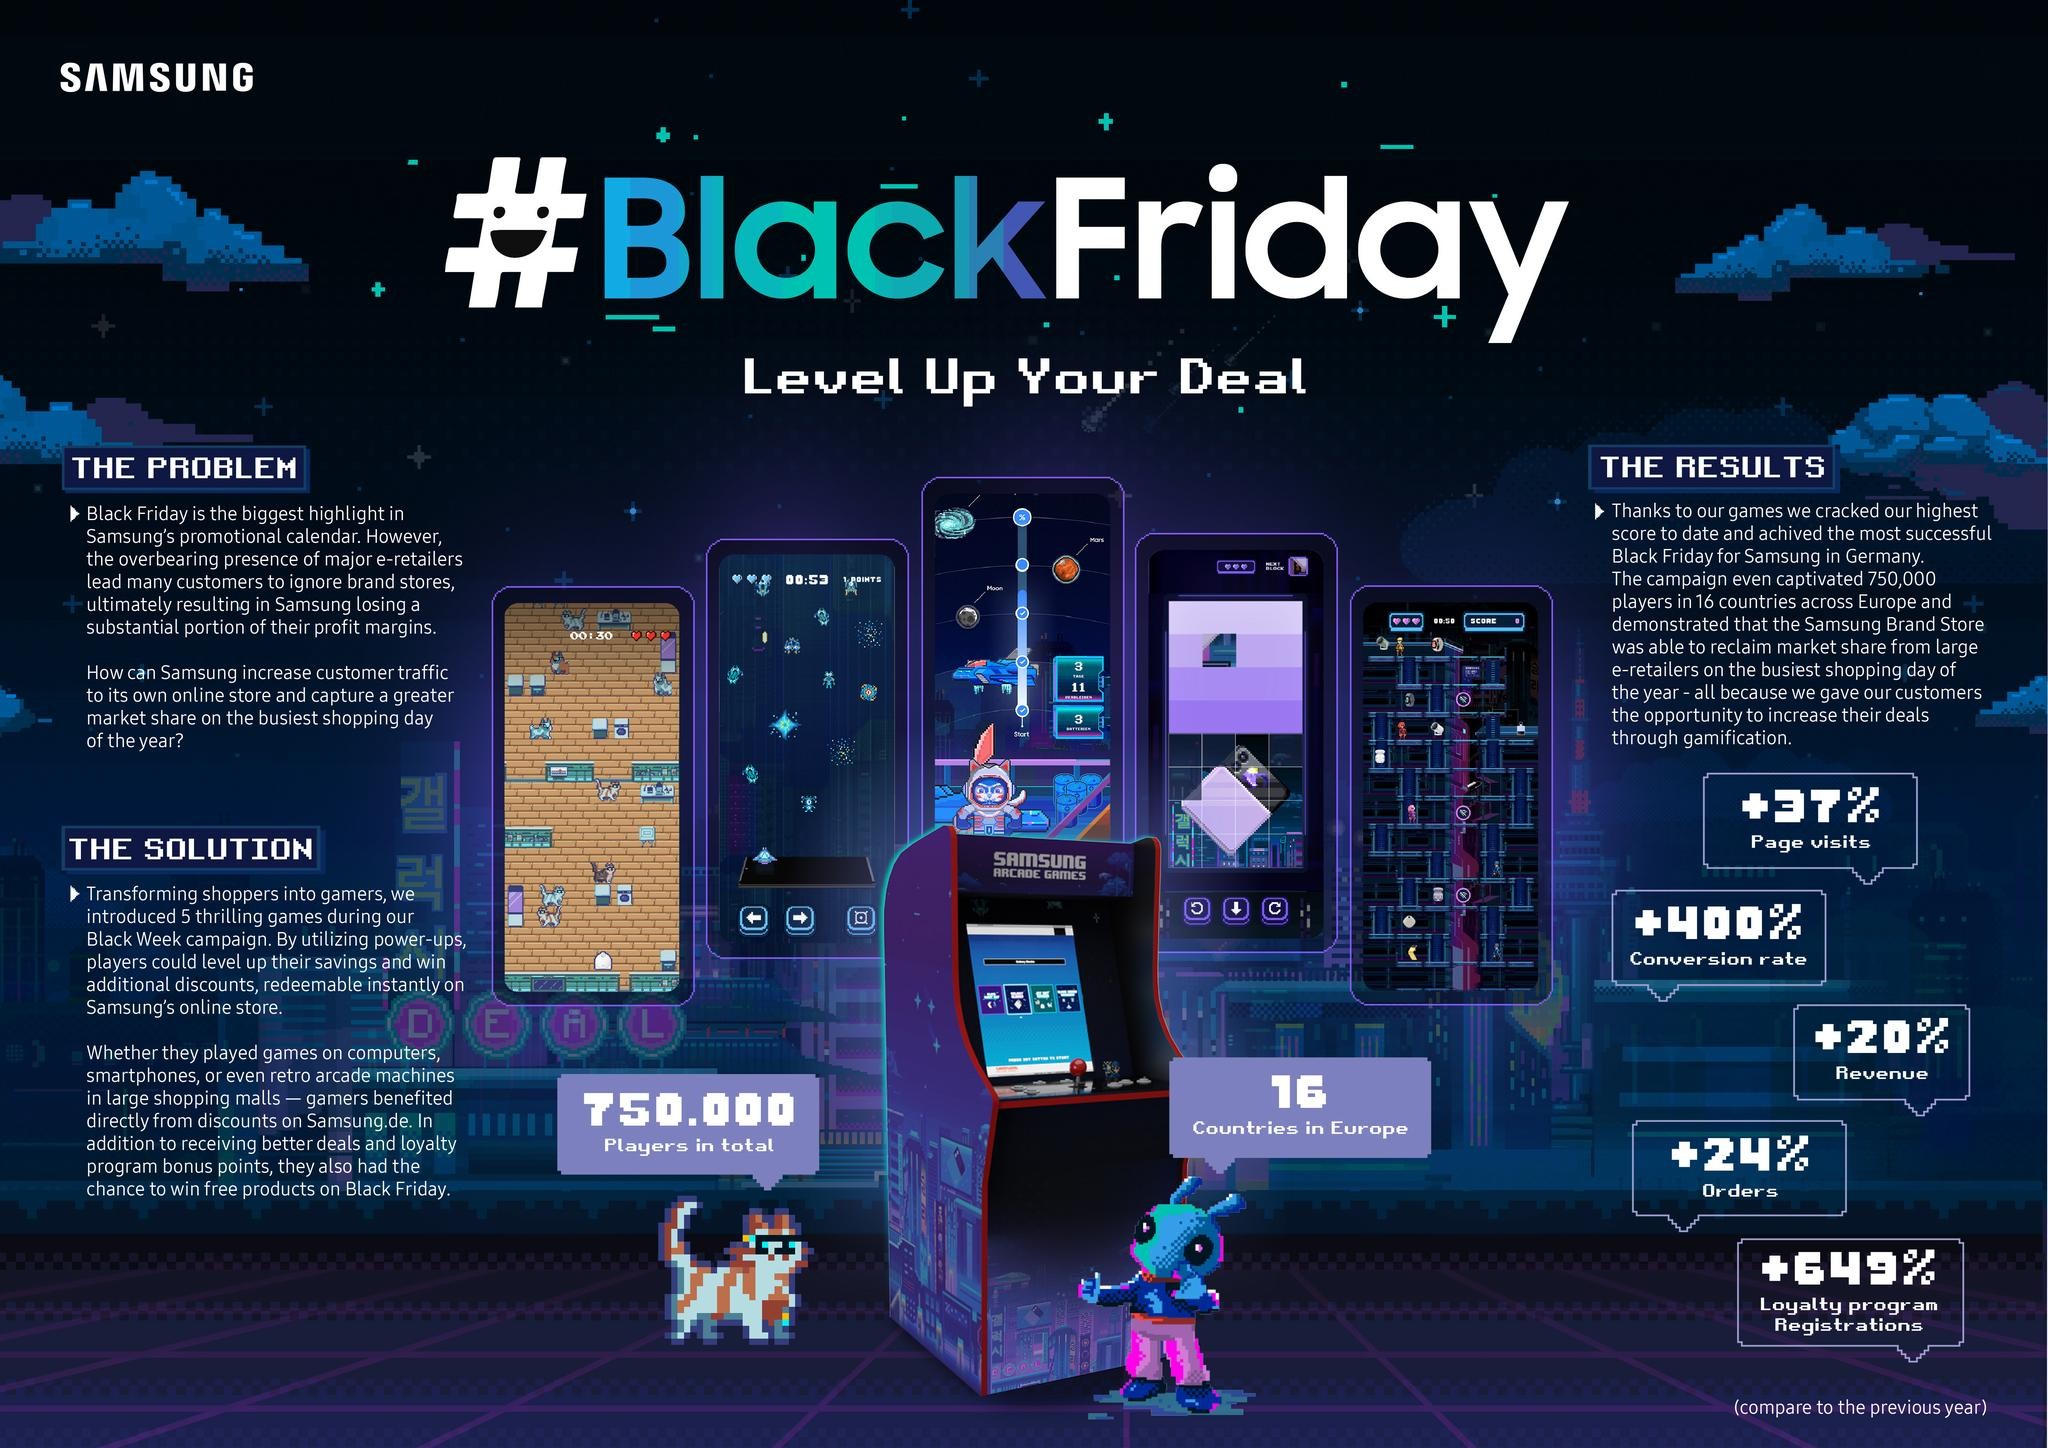 SAMSUNG BLACK FRIDAY – LEVEL UP YOUR DEAL